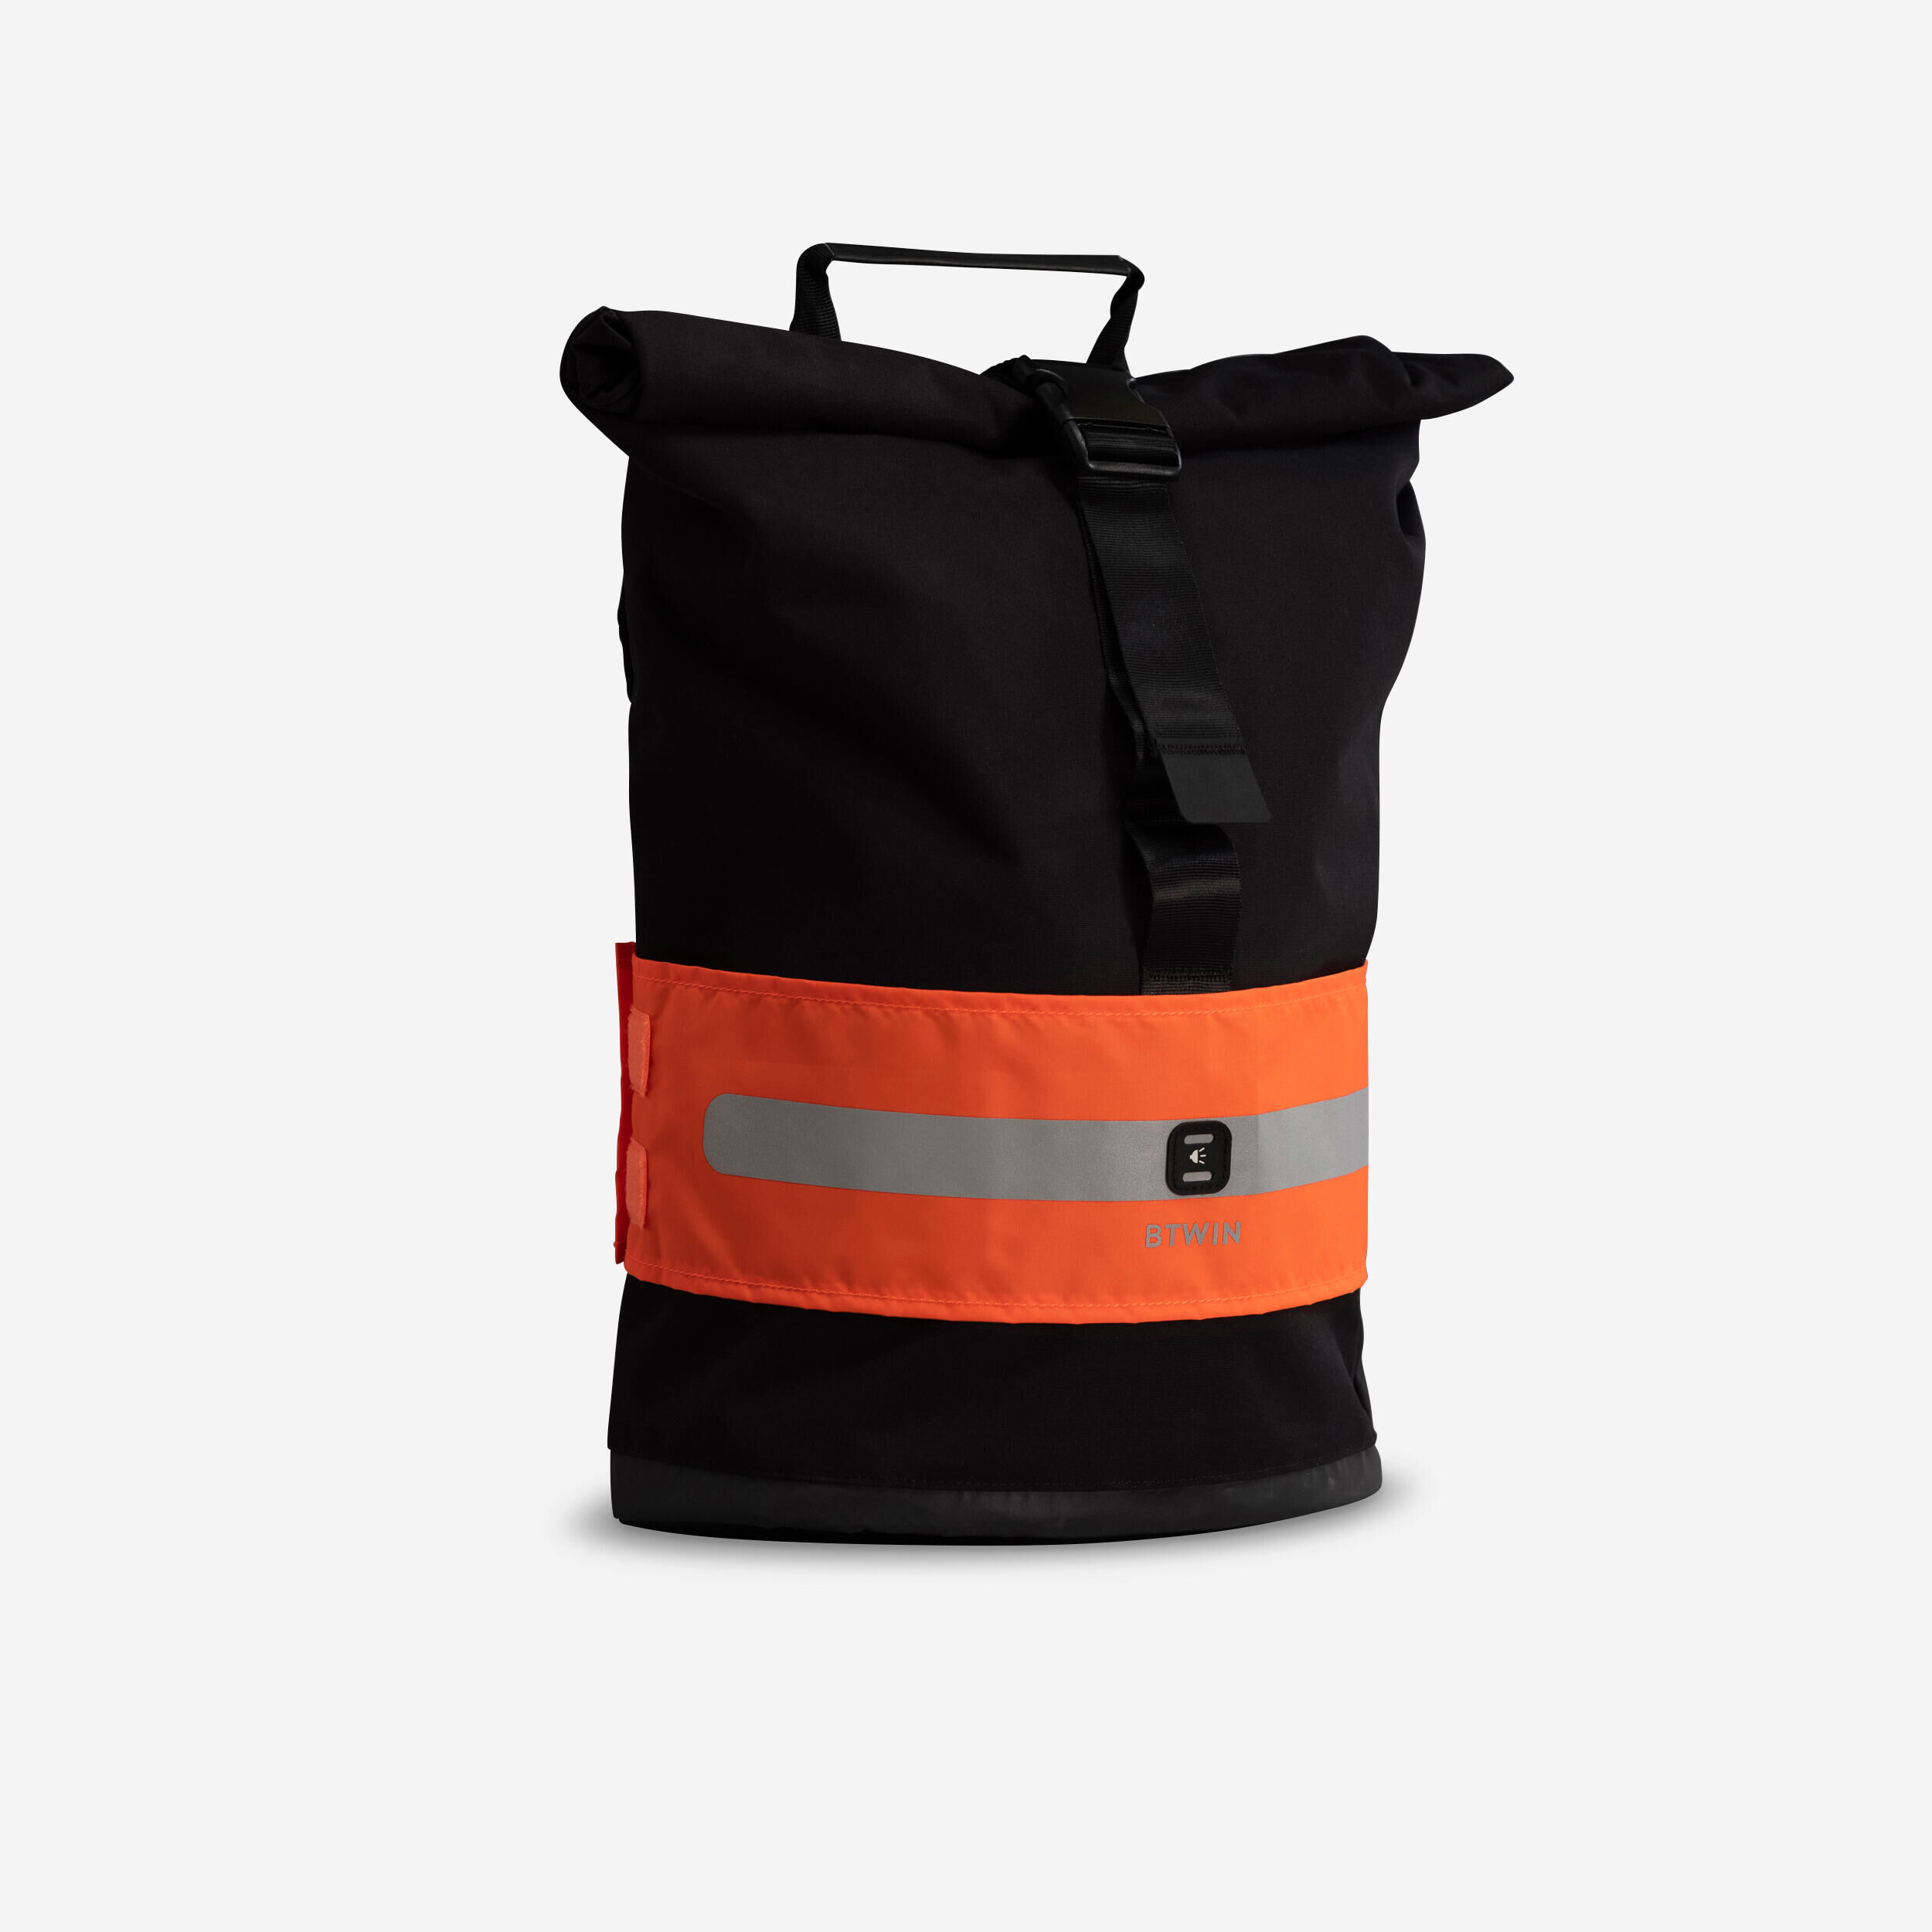 BTWIN Day and Night Visibility Bag Band - Neon Orange